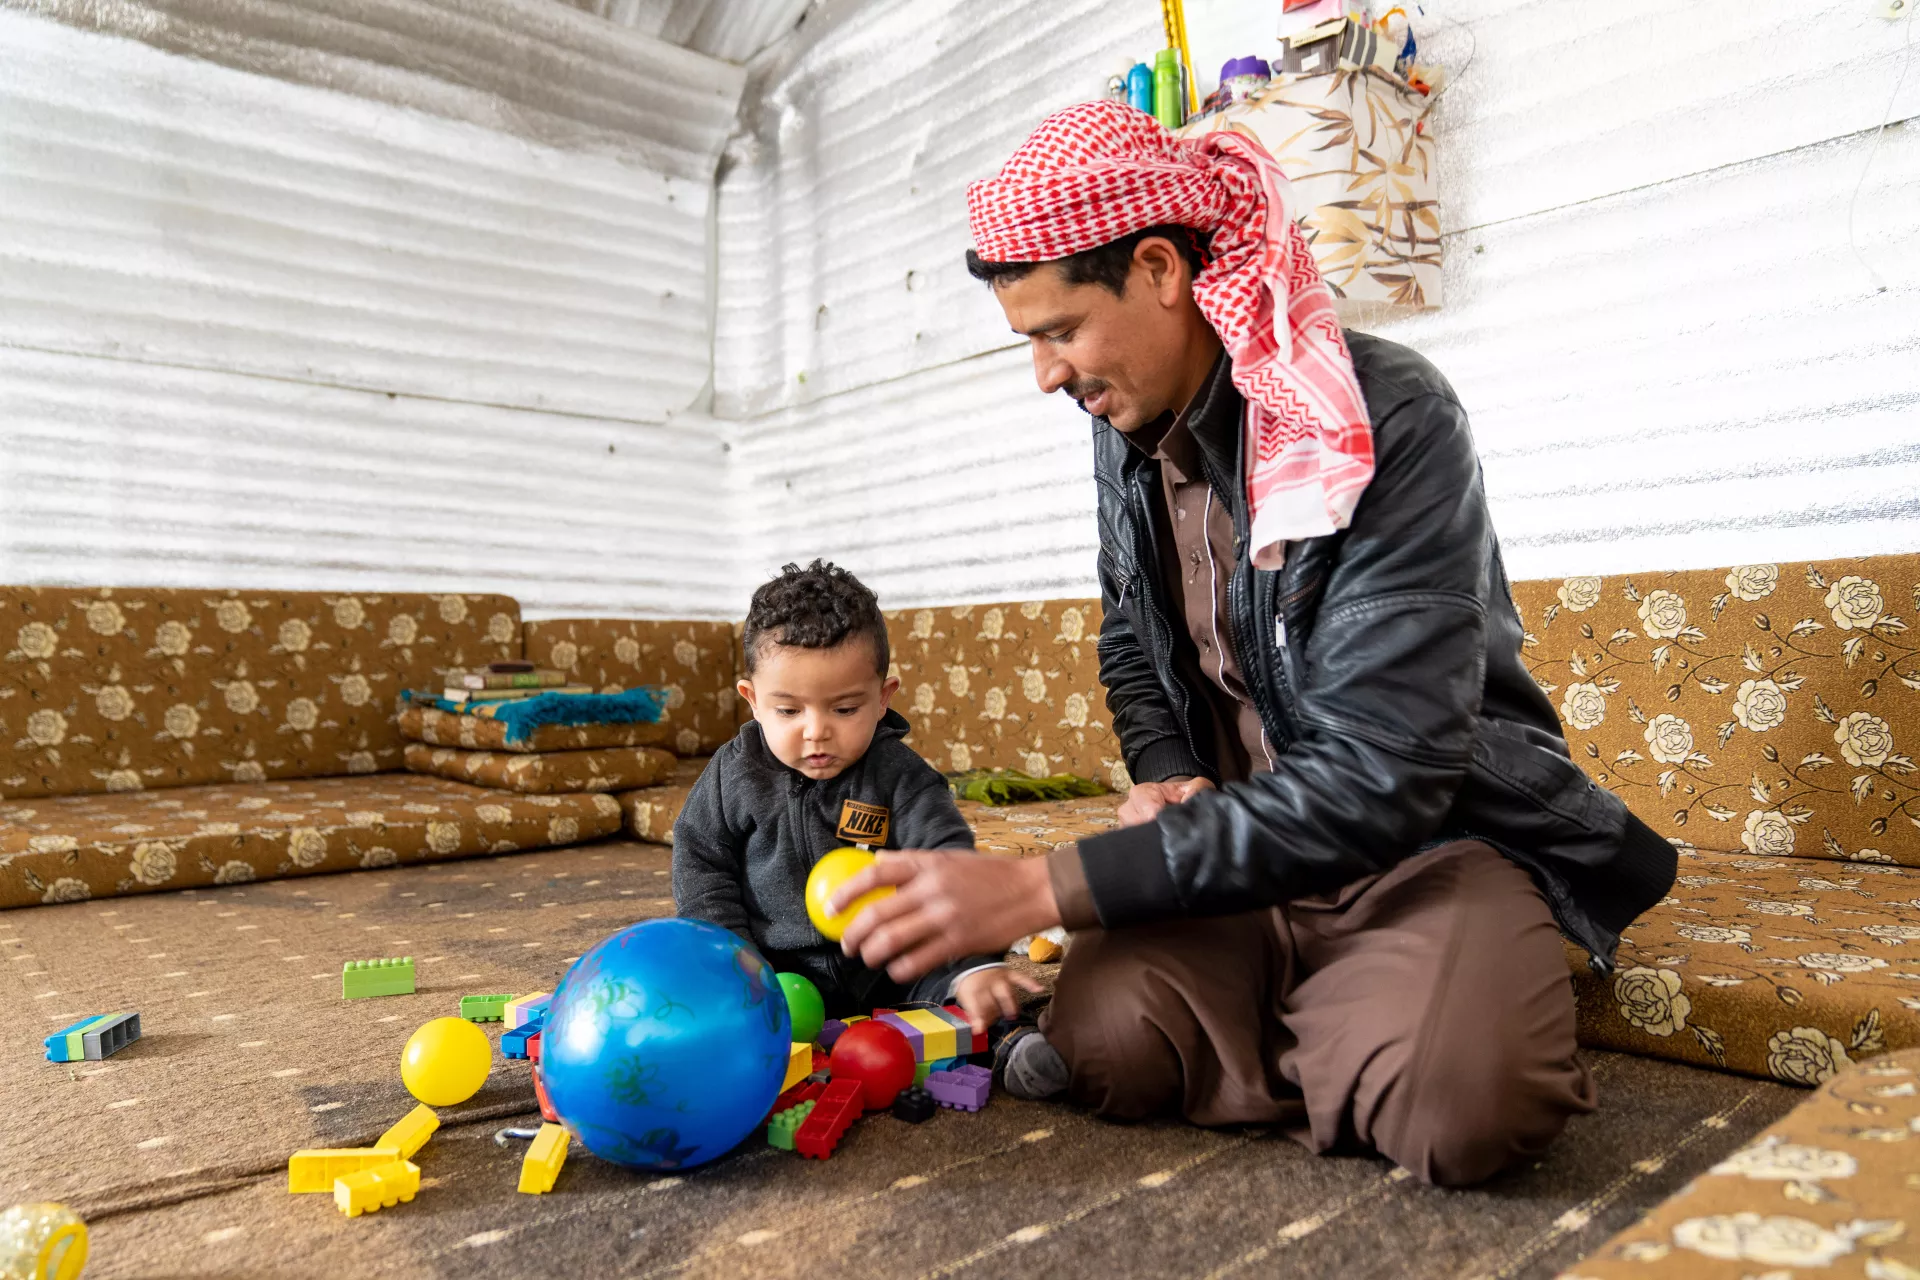 Baby Mohammad is celebrating his first birthday in Azraq Refugee Camp. He was born in the UNICEF-supported pediatric ward in the camp and for his first birthday, he is receiving his latest vaccination in one of the camp’s health centres, also supported by UNICEF.